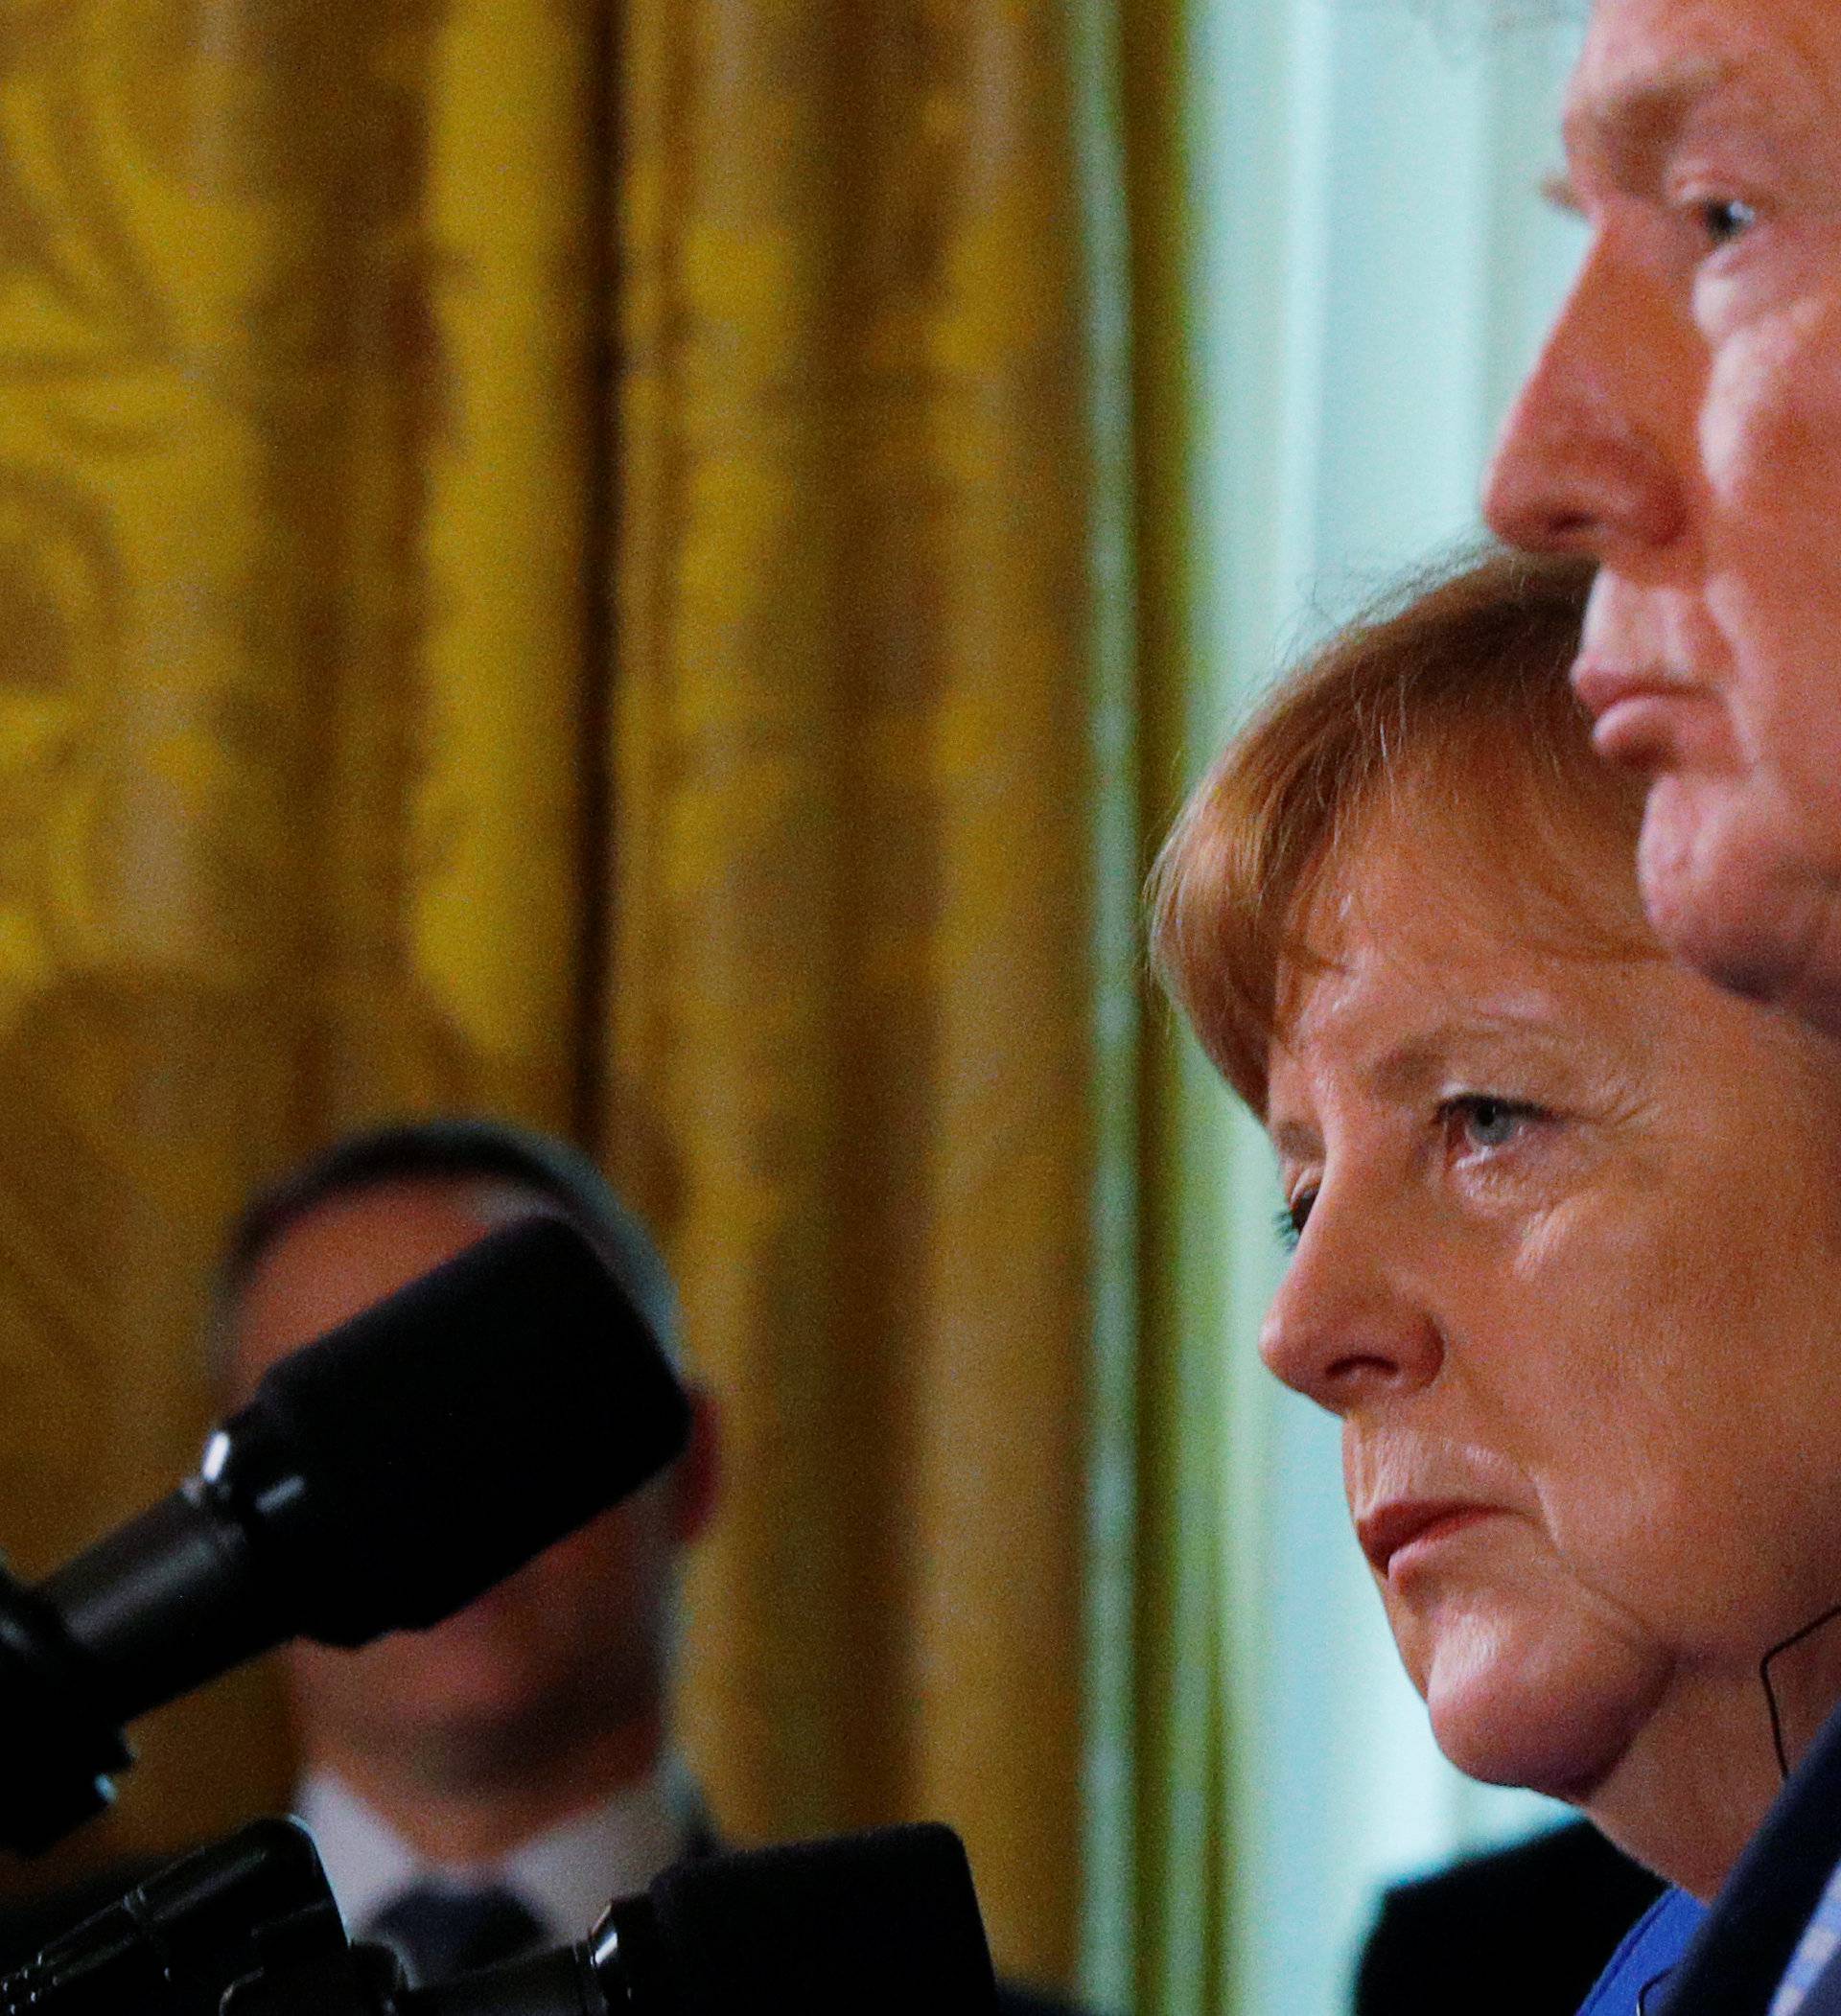 U.S. President Donald Trump and Germany's Chancellor Angela Merkel hold a joint news conference at the White House in Washington